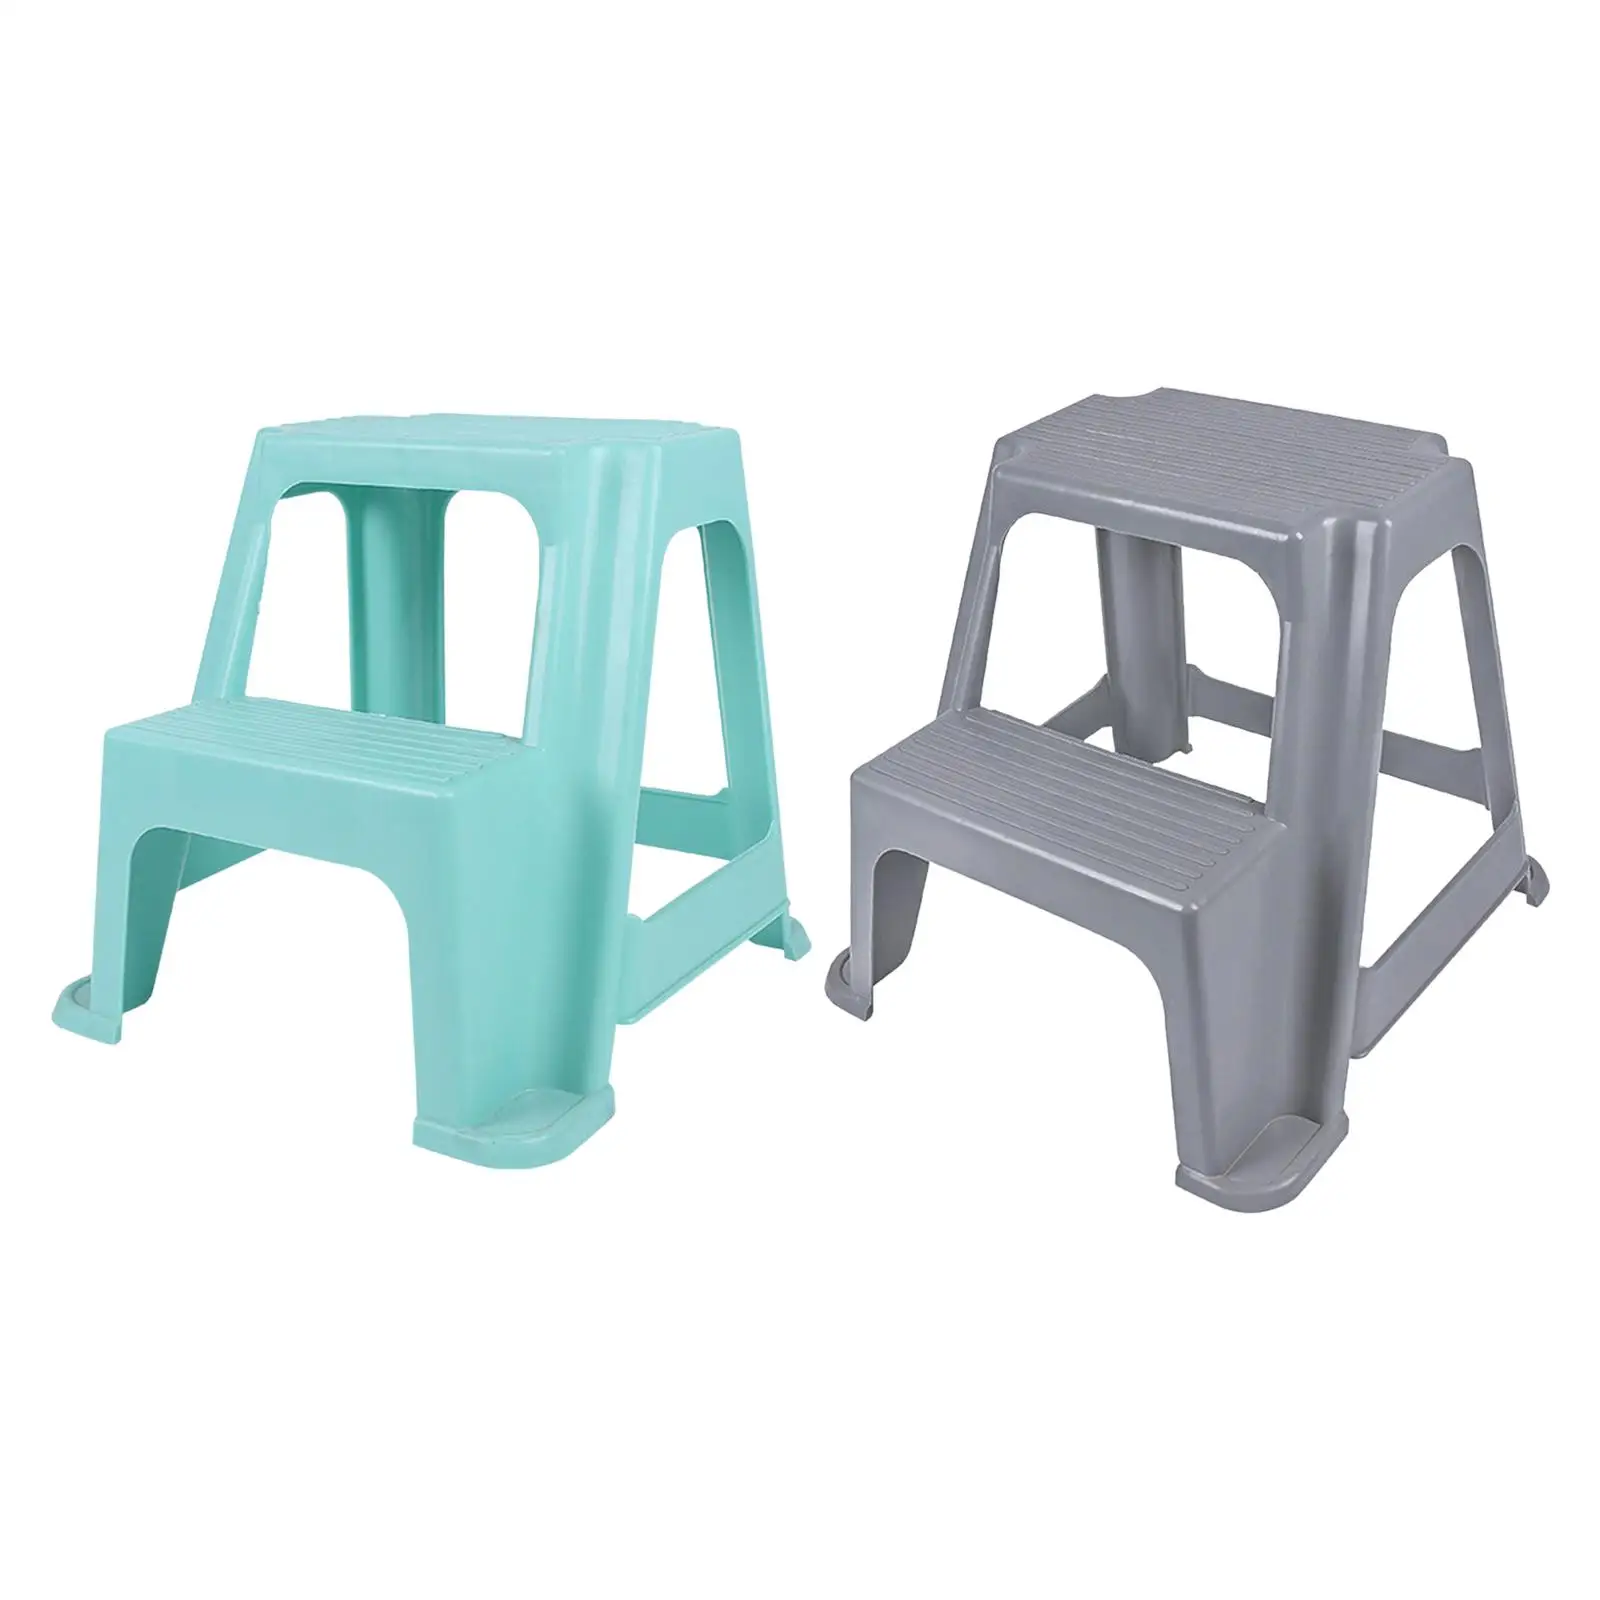 

2 Step Stool, Two Step Stool, Lightweight Bedside Step Stool Stepstool Double Stool for Kids, Dogs, Children, Kitchen